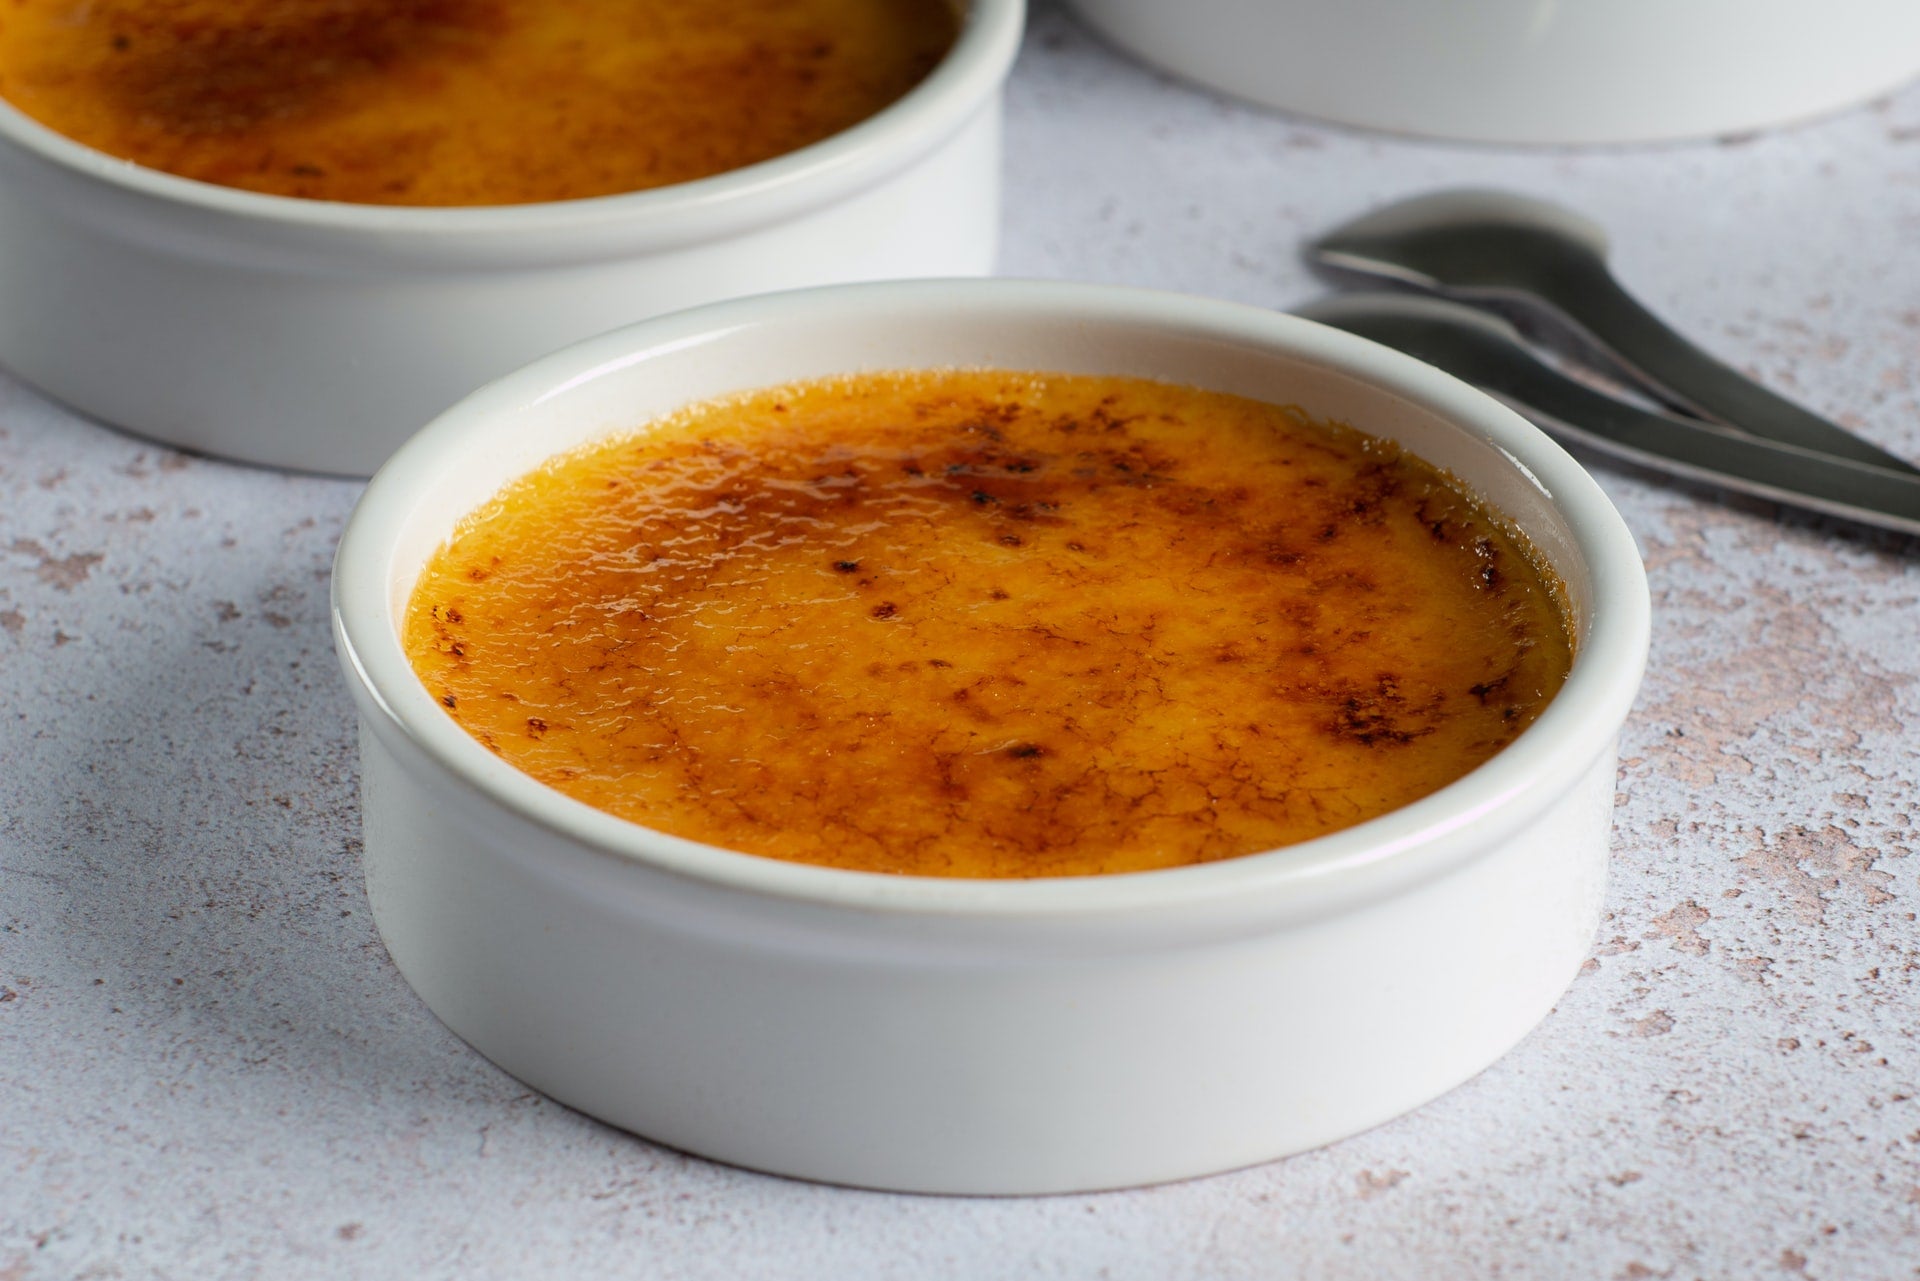 Crème Brûlée 101: Everything You Ever Wanted to Know